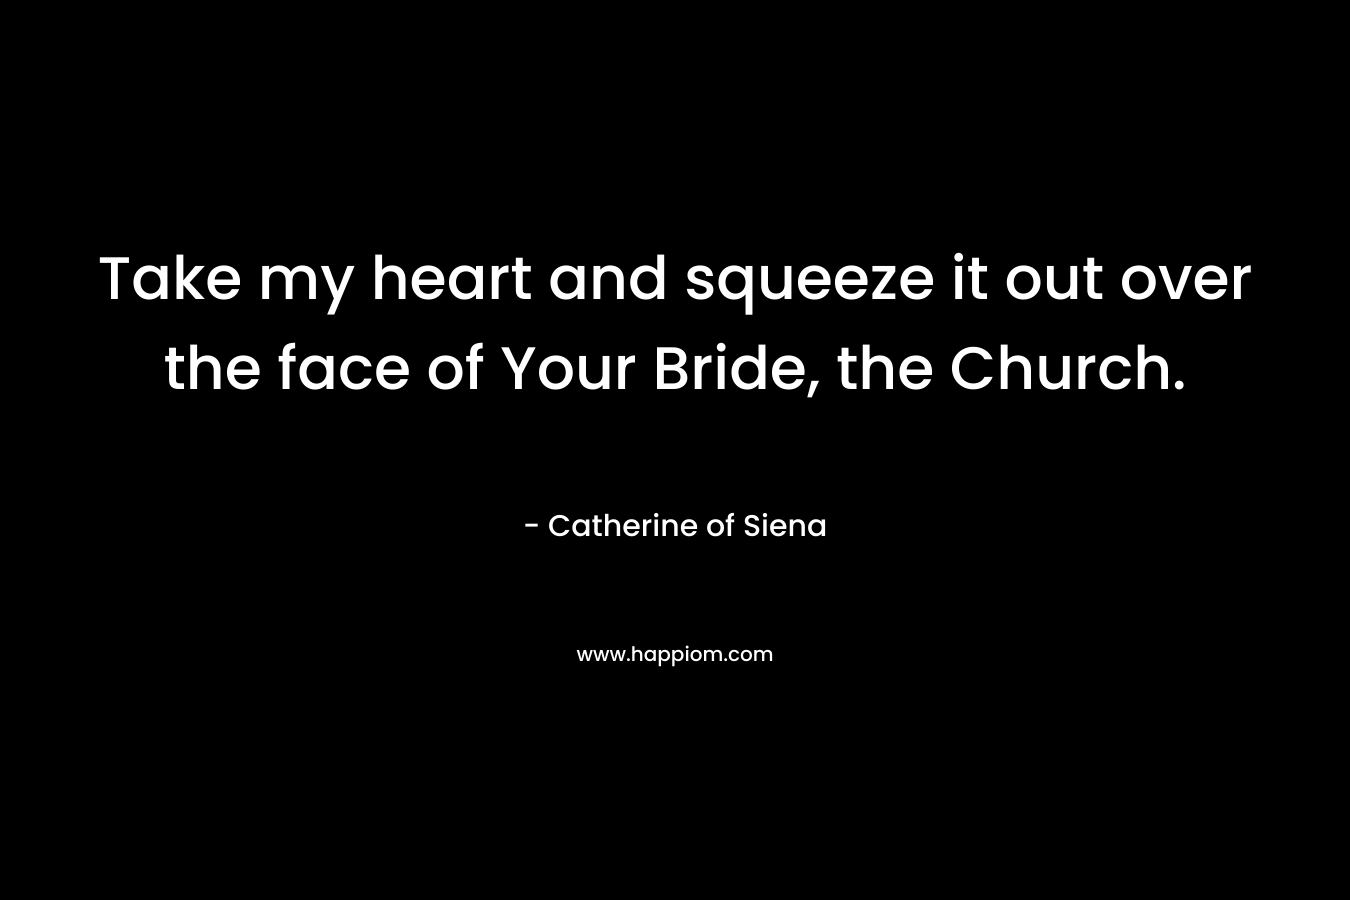 Take my heart and squeeze it out over the face of Your Bride, the Church.